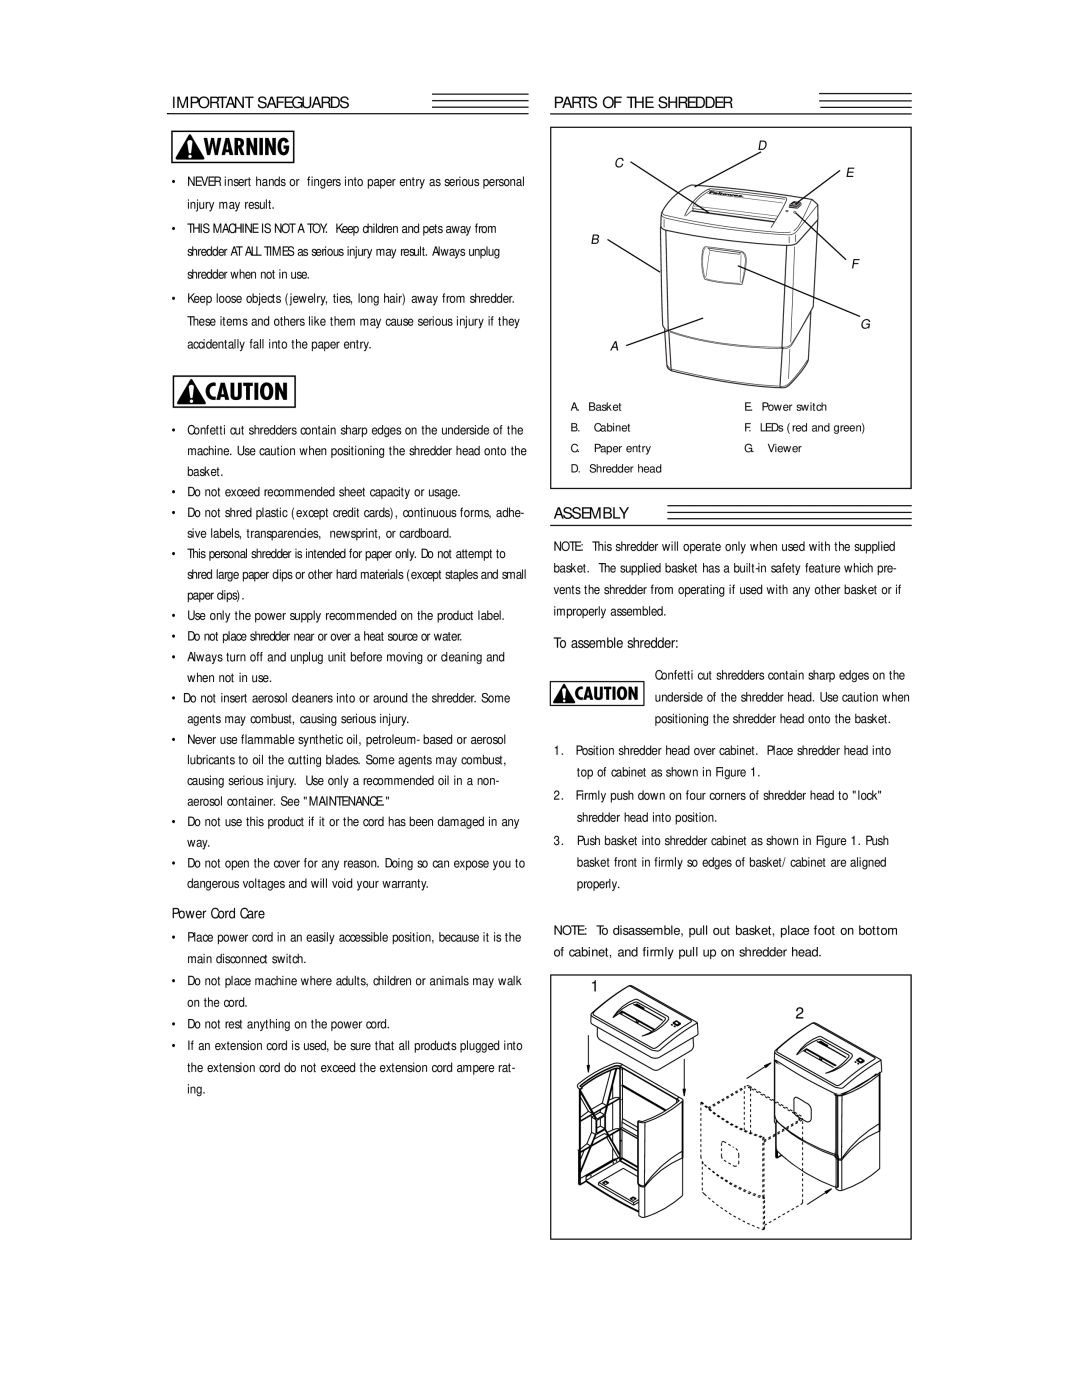 Fellowes DM65C manual Important Safeguards, Parts Of The Shredder, Assembly, Power Cord Care, To assemble shredder, basket 